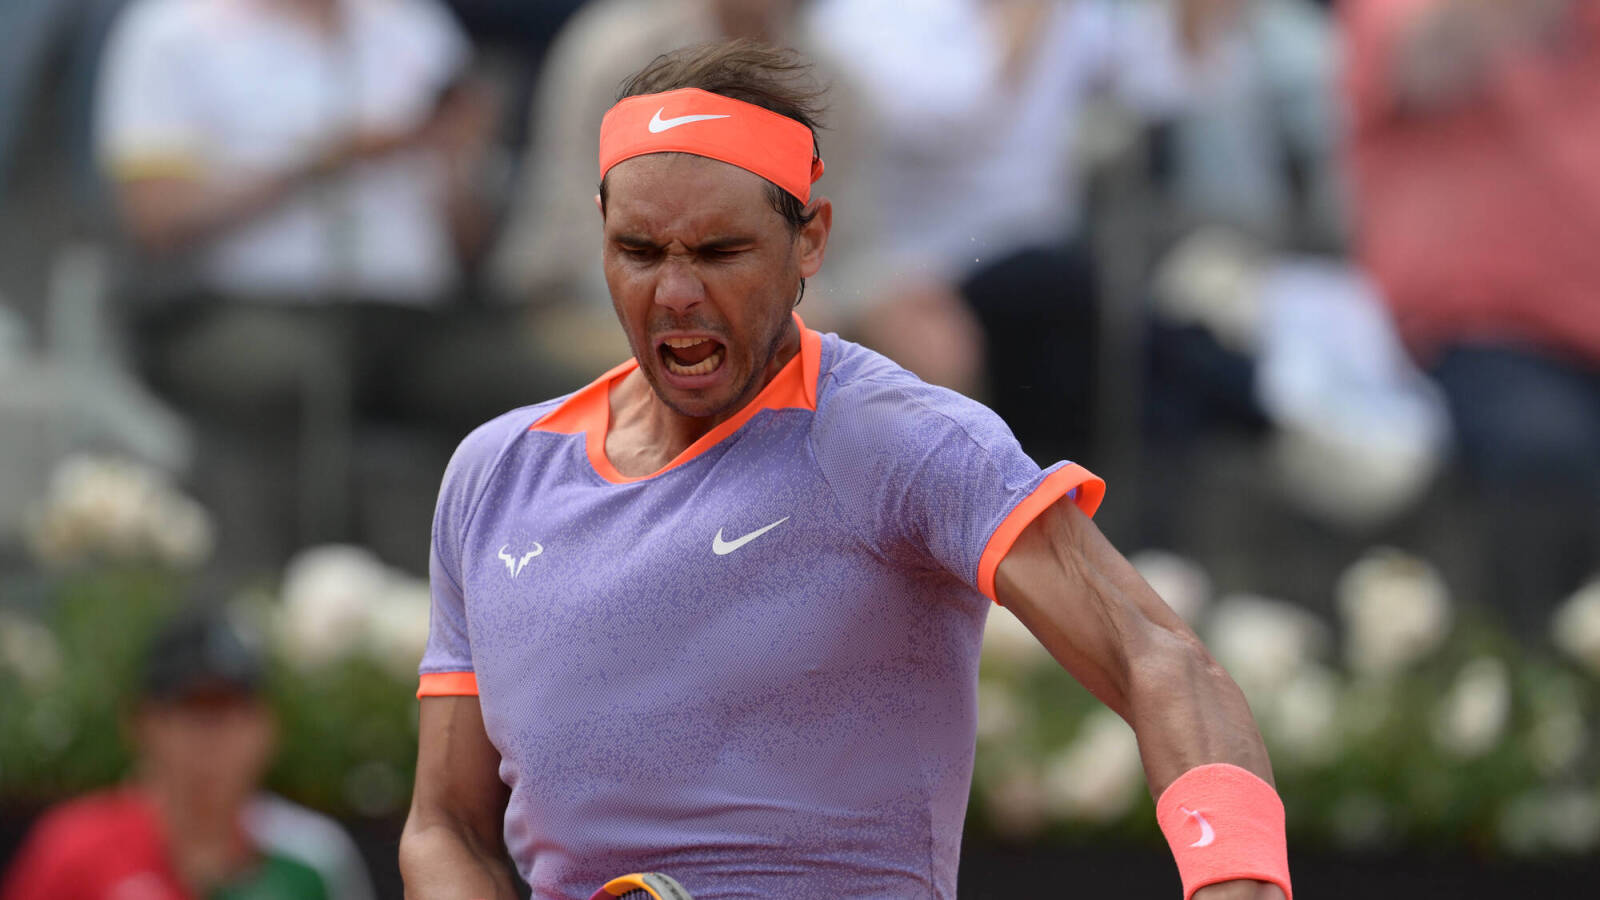 'I found a way to win, that’s important,' Rafael Nadal gets past Zizou Bergs in a grueling first Round encounter in Rome